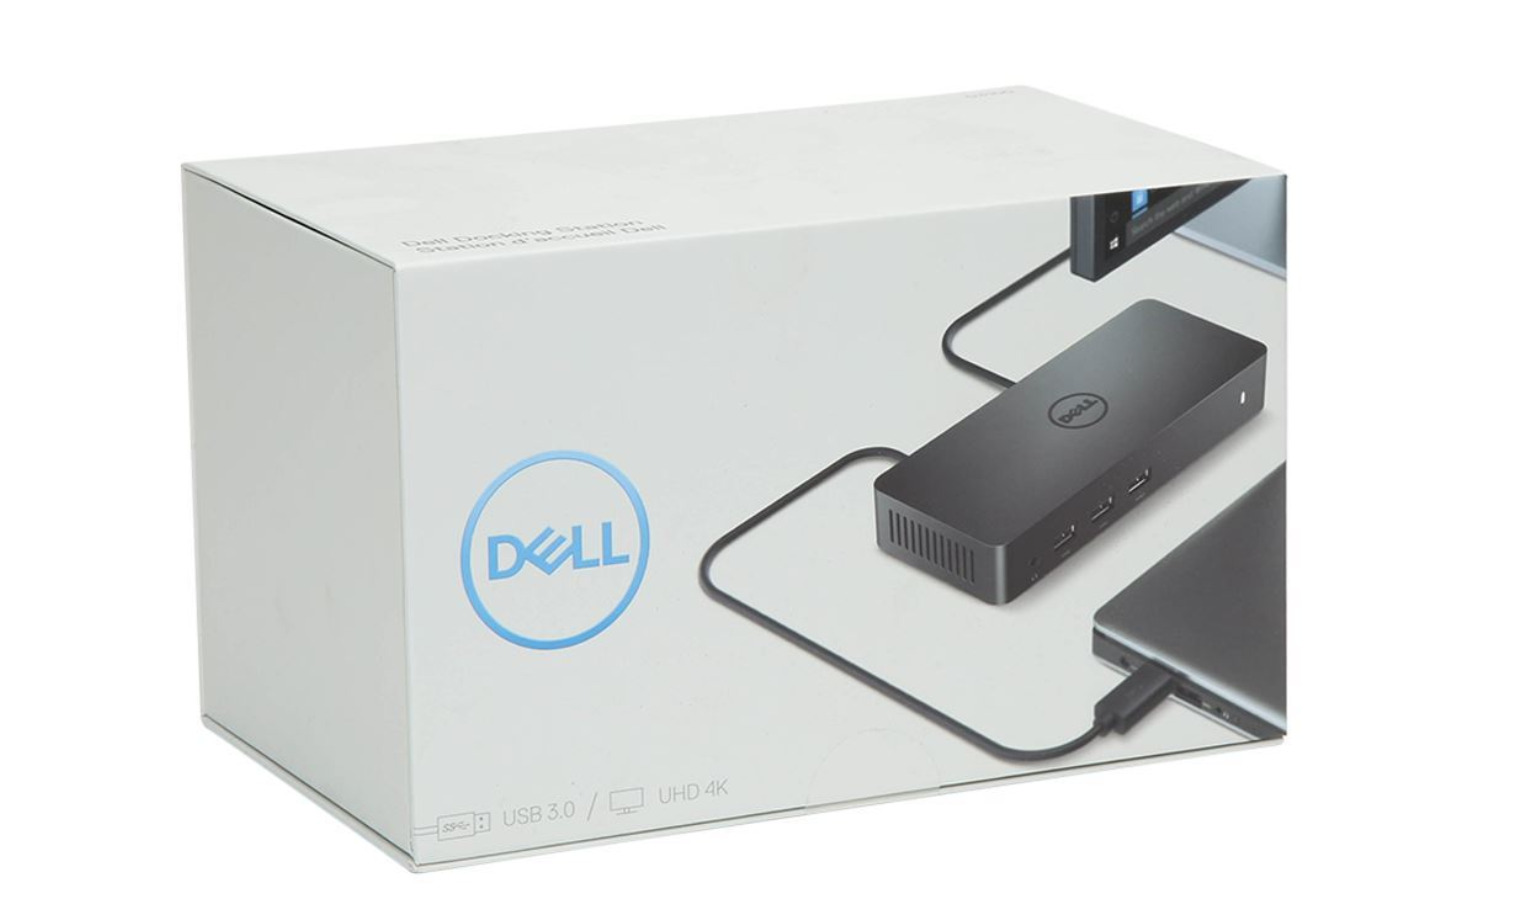 Dell USB 3.0 Ultra HD 4K Triple Display Docking Station (D3100) Opened, unsealed